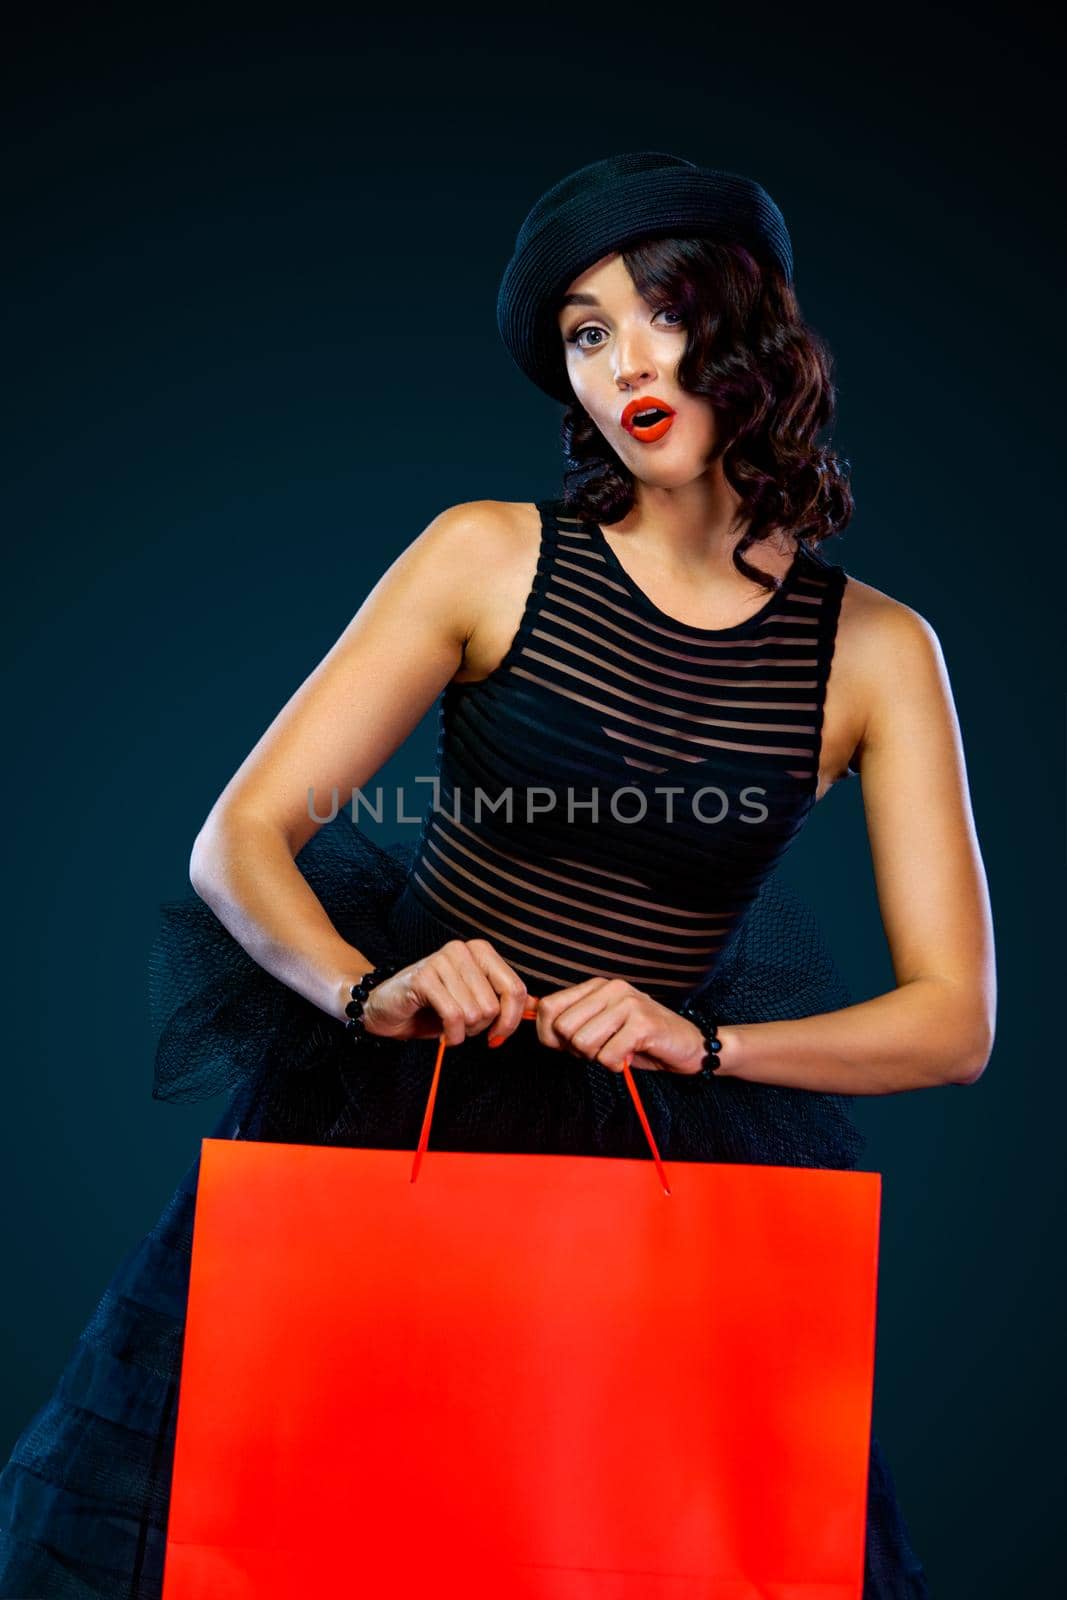 Beautiful young woman make shopping in black friday holiday. Girl with black bag on dark background.